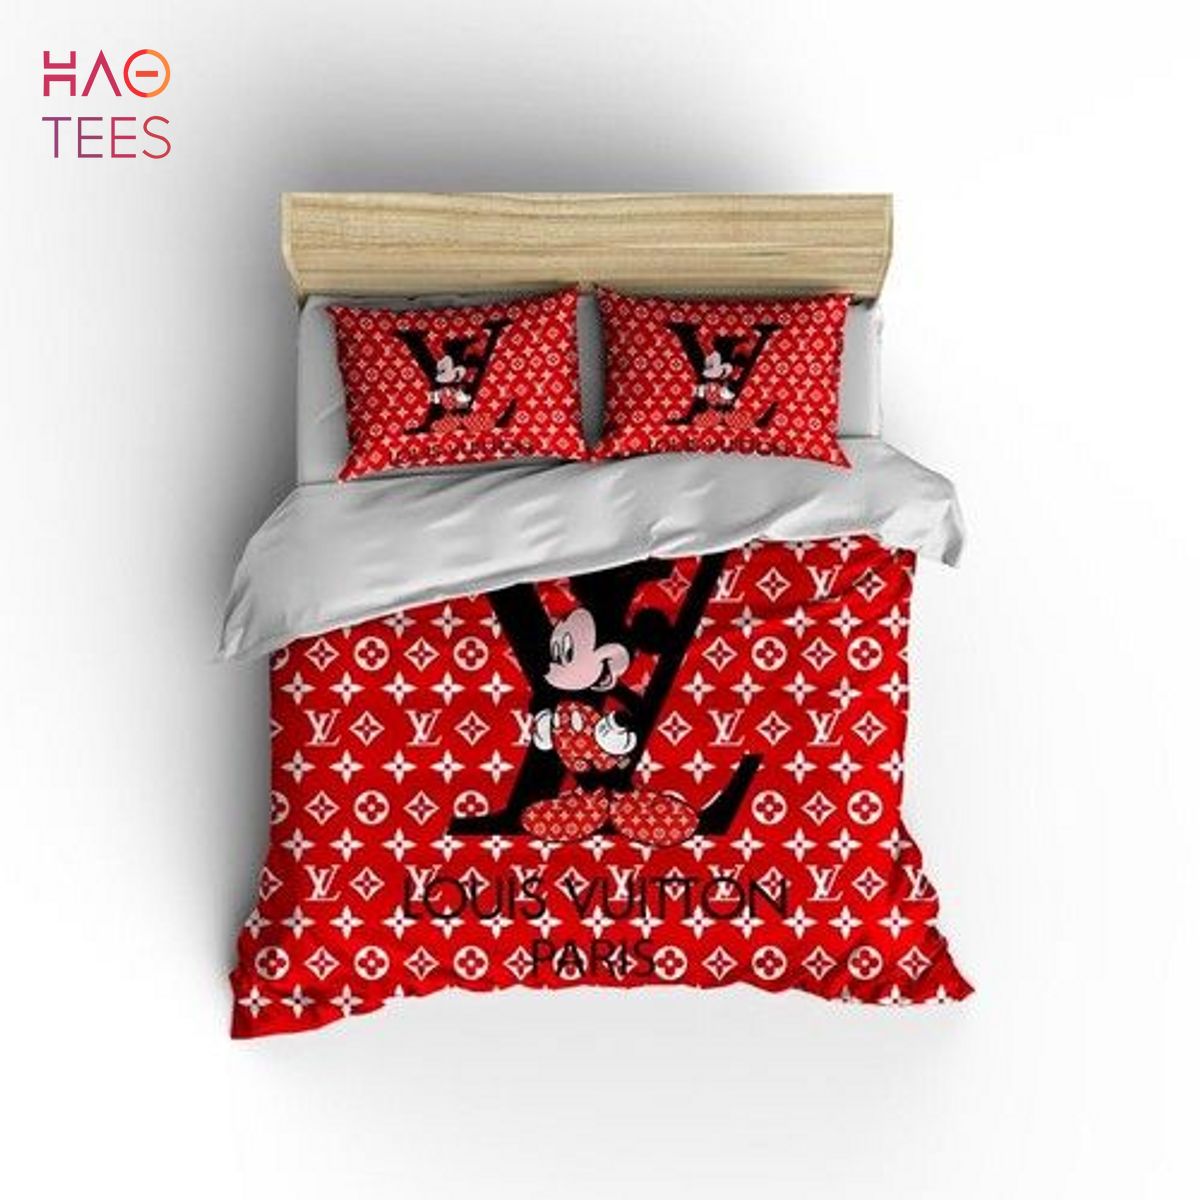 LV Mickey Mouse Luxury Bedding Set Luxury Duvet Cover Duvet Cover And Pillows